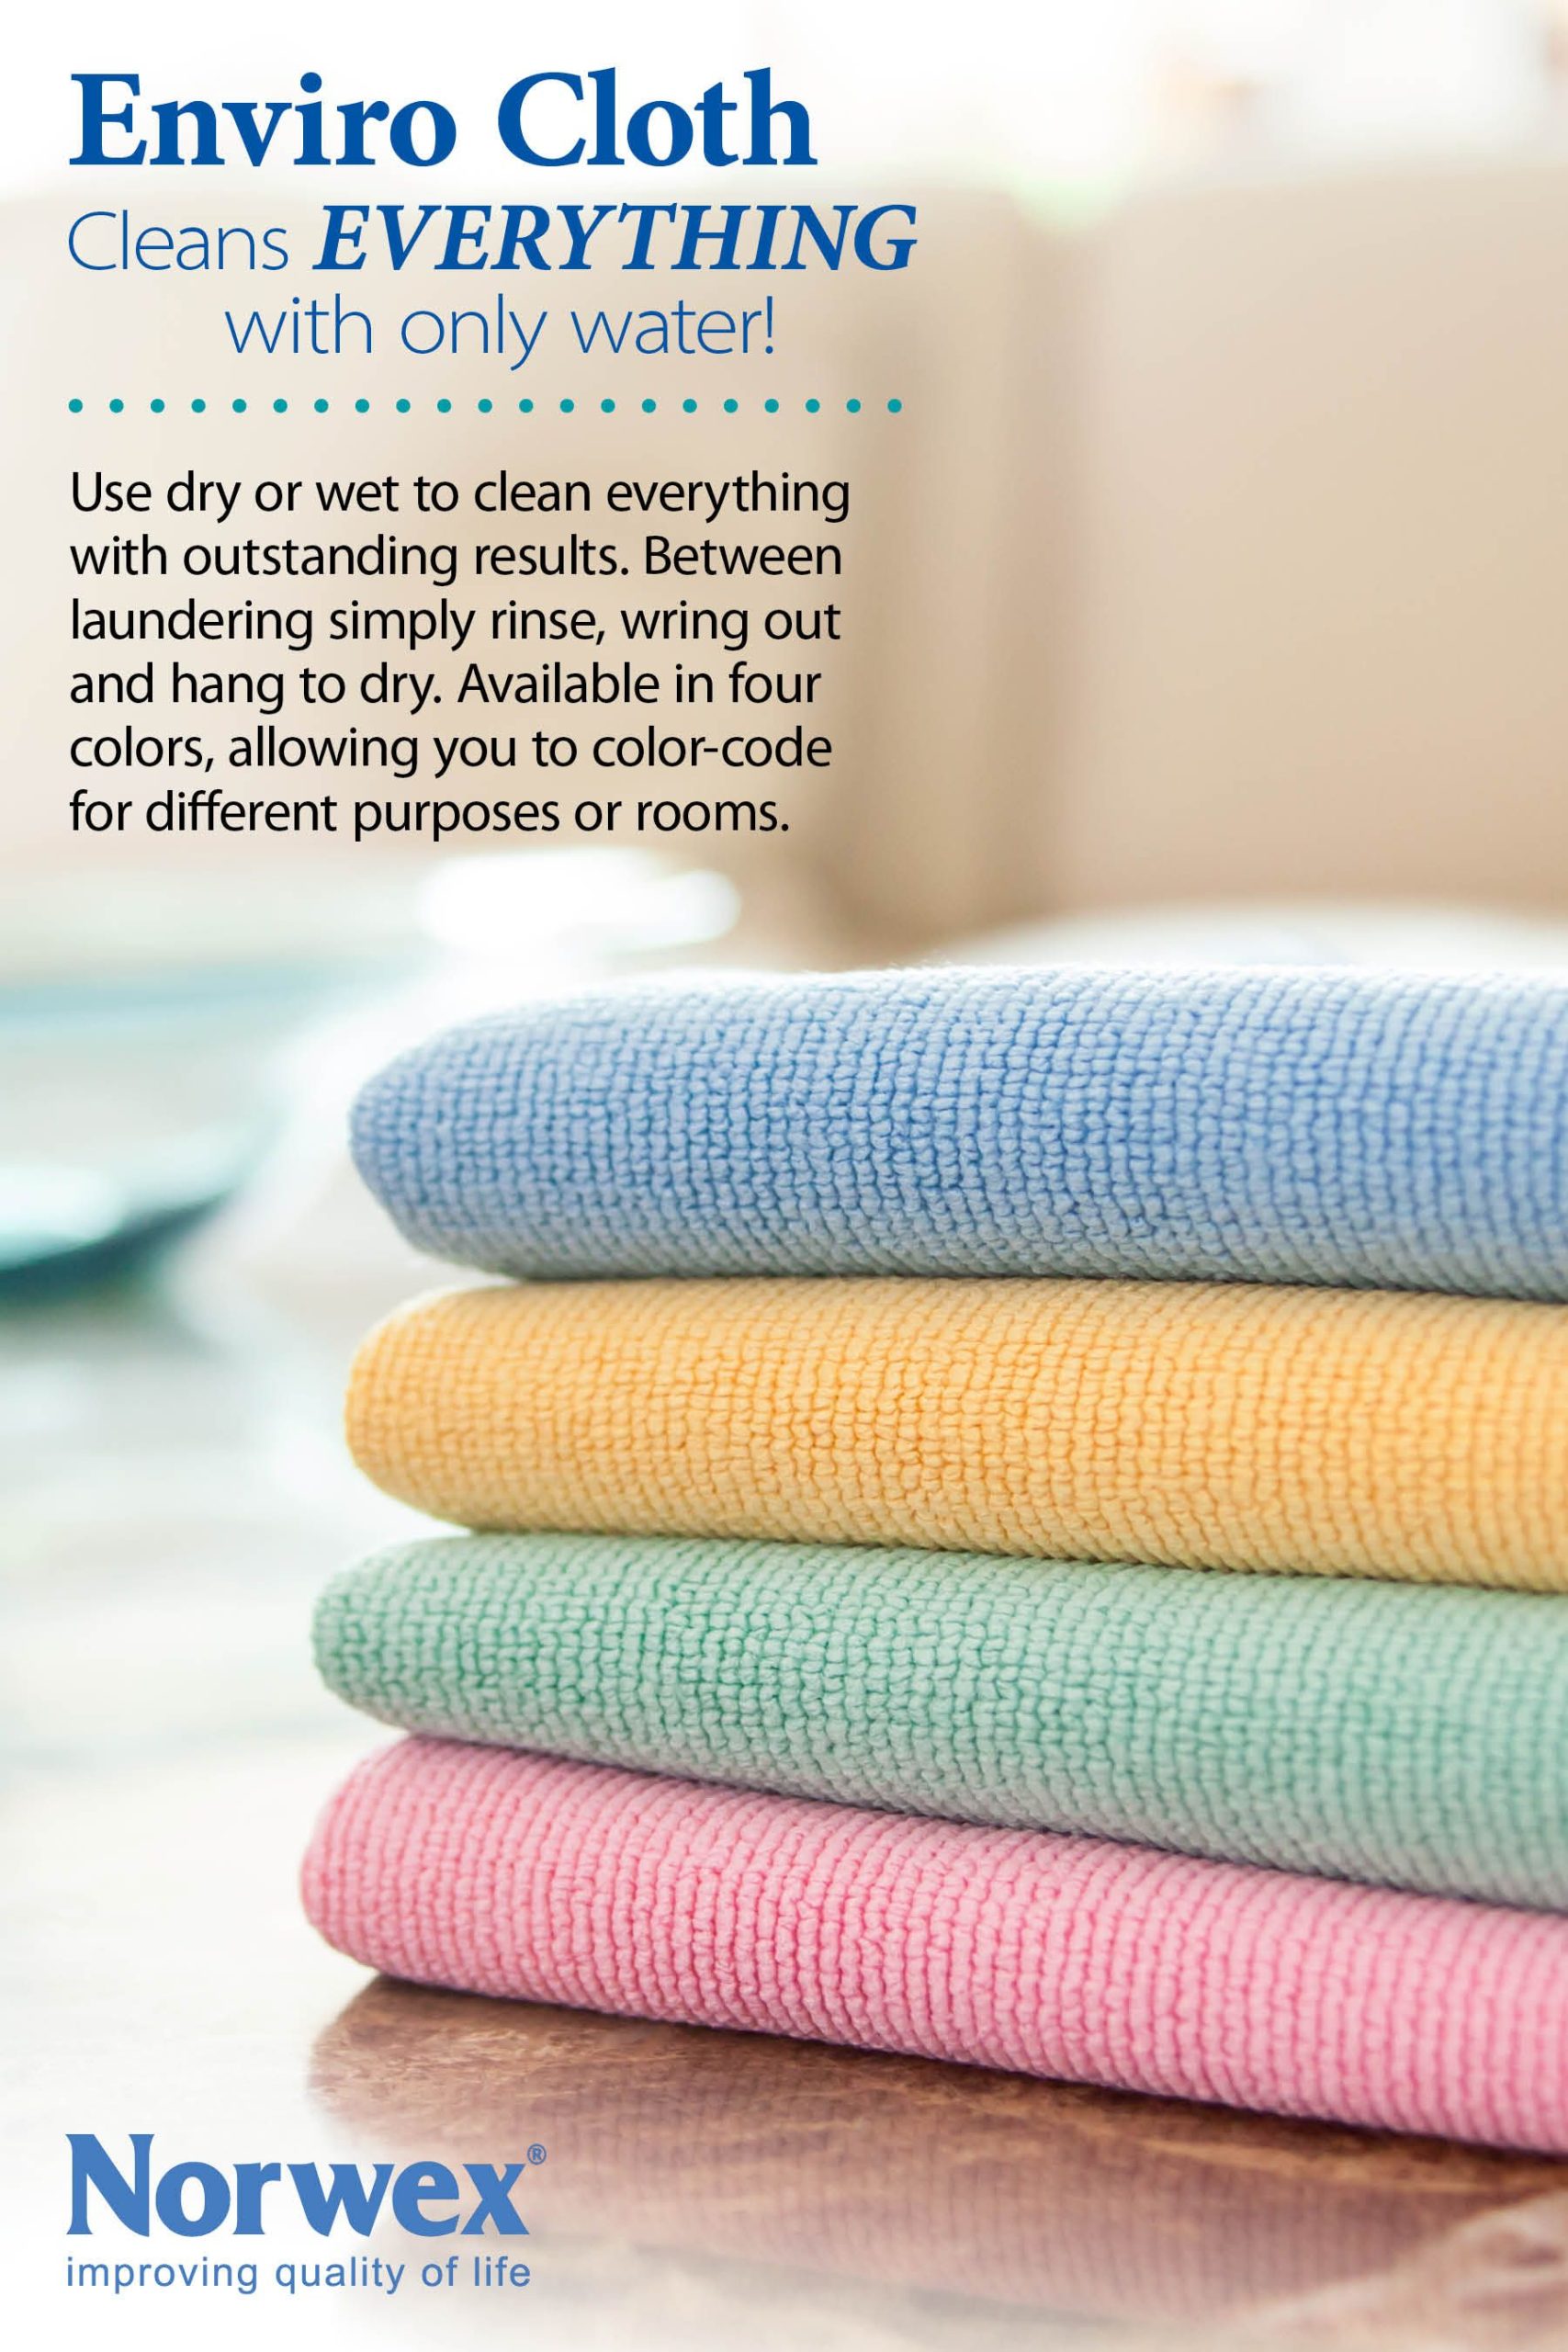 An Honest Review of Norwex Cleaning Supplies: Too Good to be True?